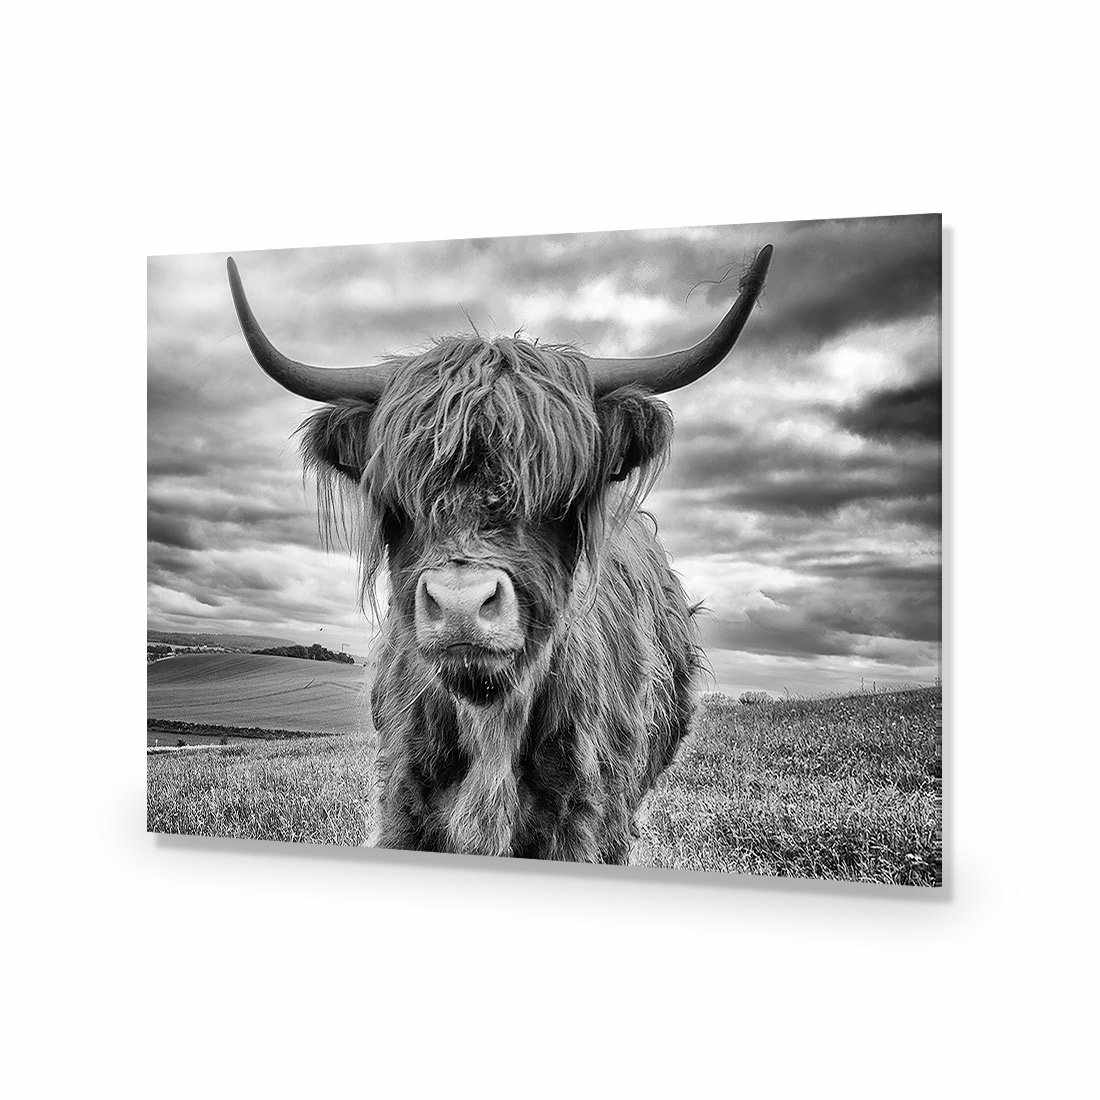 Stormy the Highland Acrylic Glass Art-Acrylic-Wall Art Designs-Without Border-Acrylic - No Frame-45x30cm-Wall Art Designs